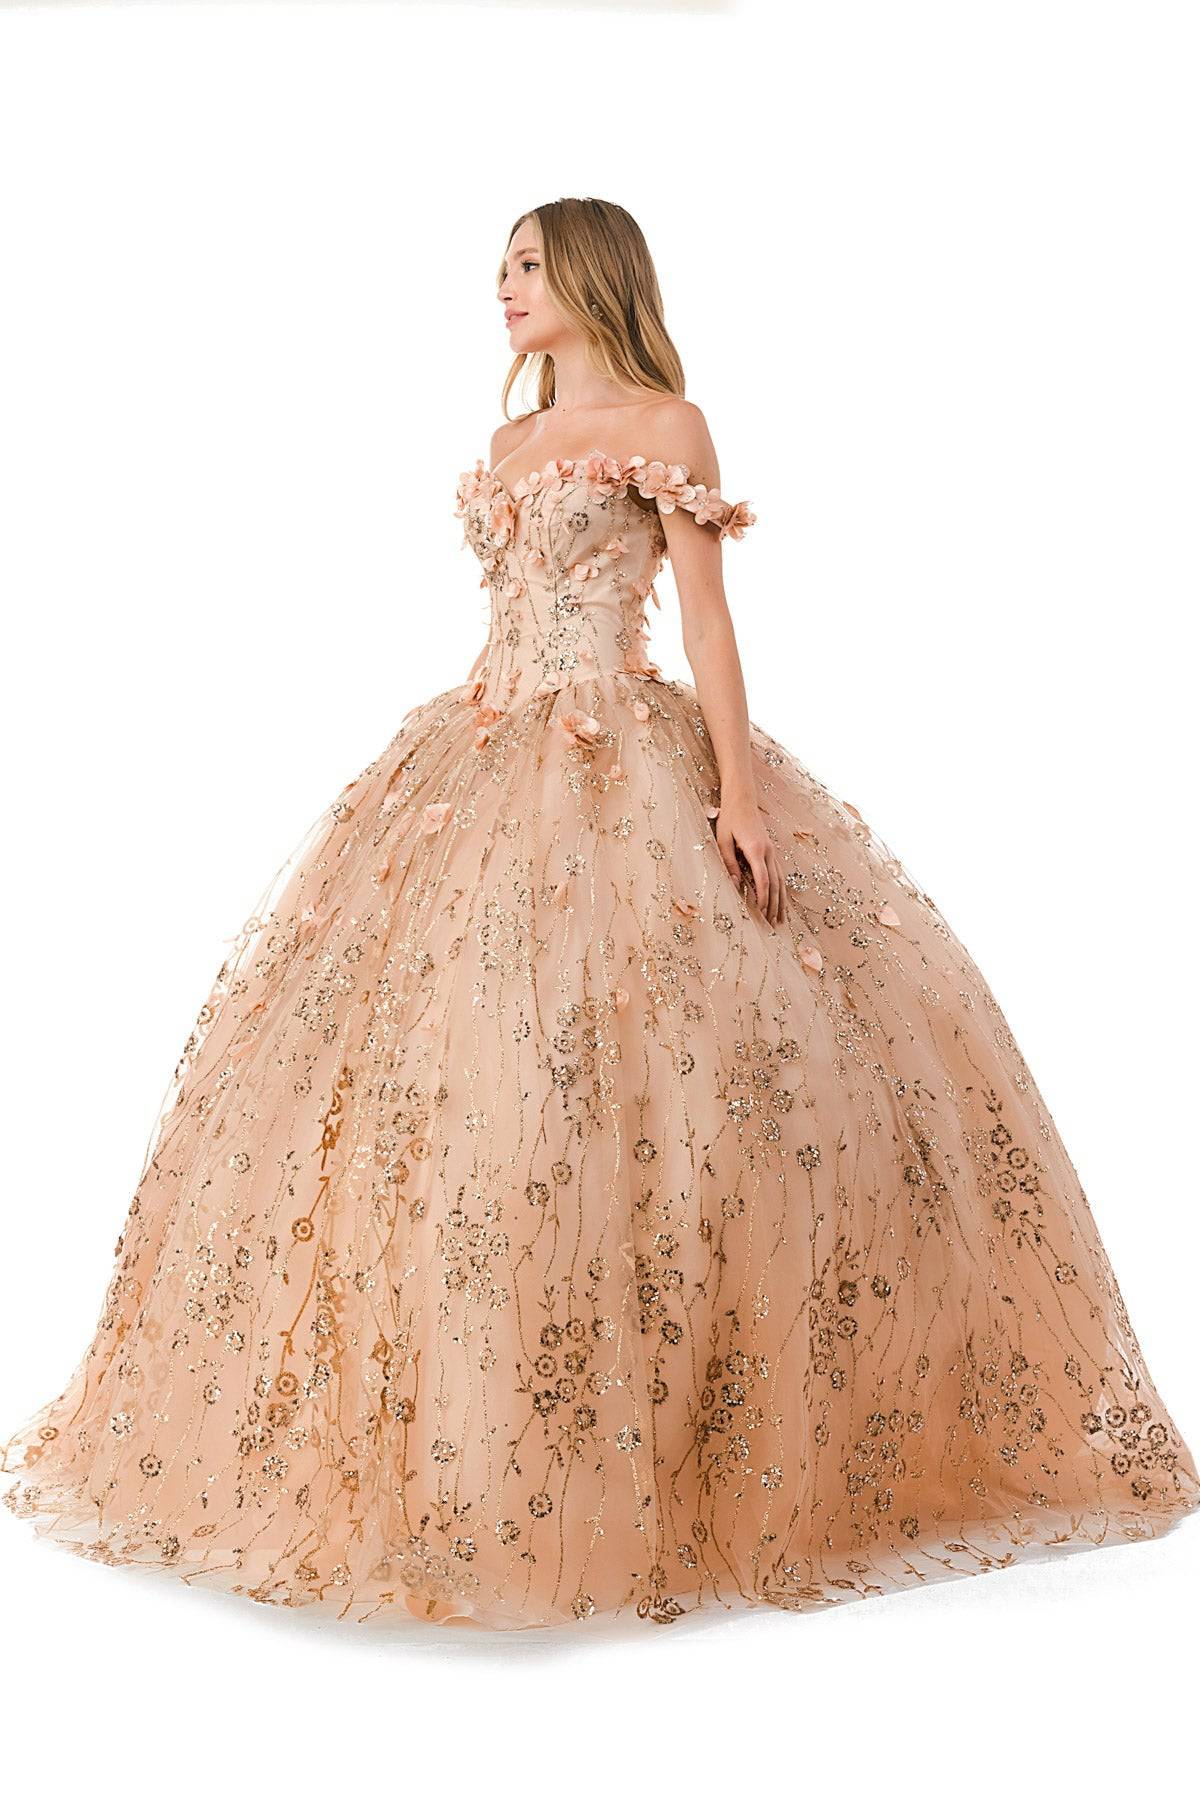 Aspeed L2766A Gorgeous Rose Gold Floral Inspired Ball Gown - NORMA REED